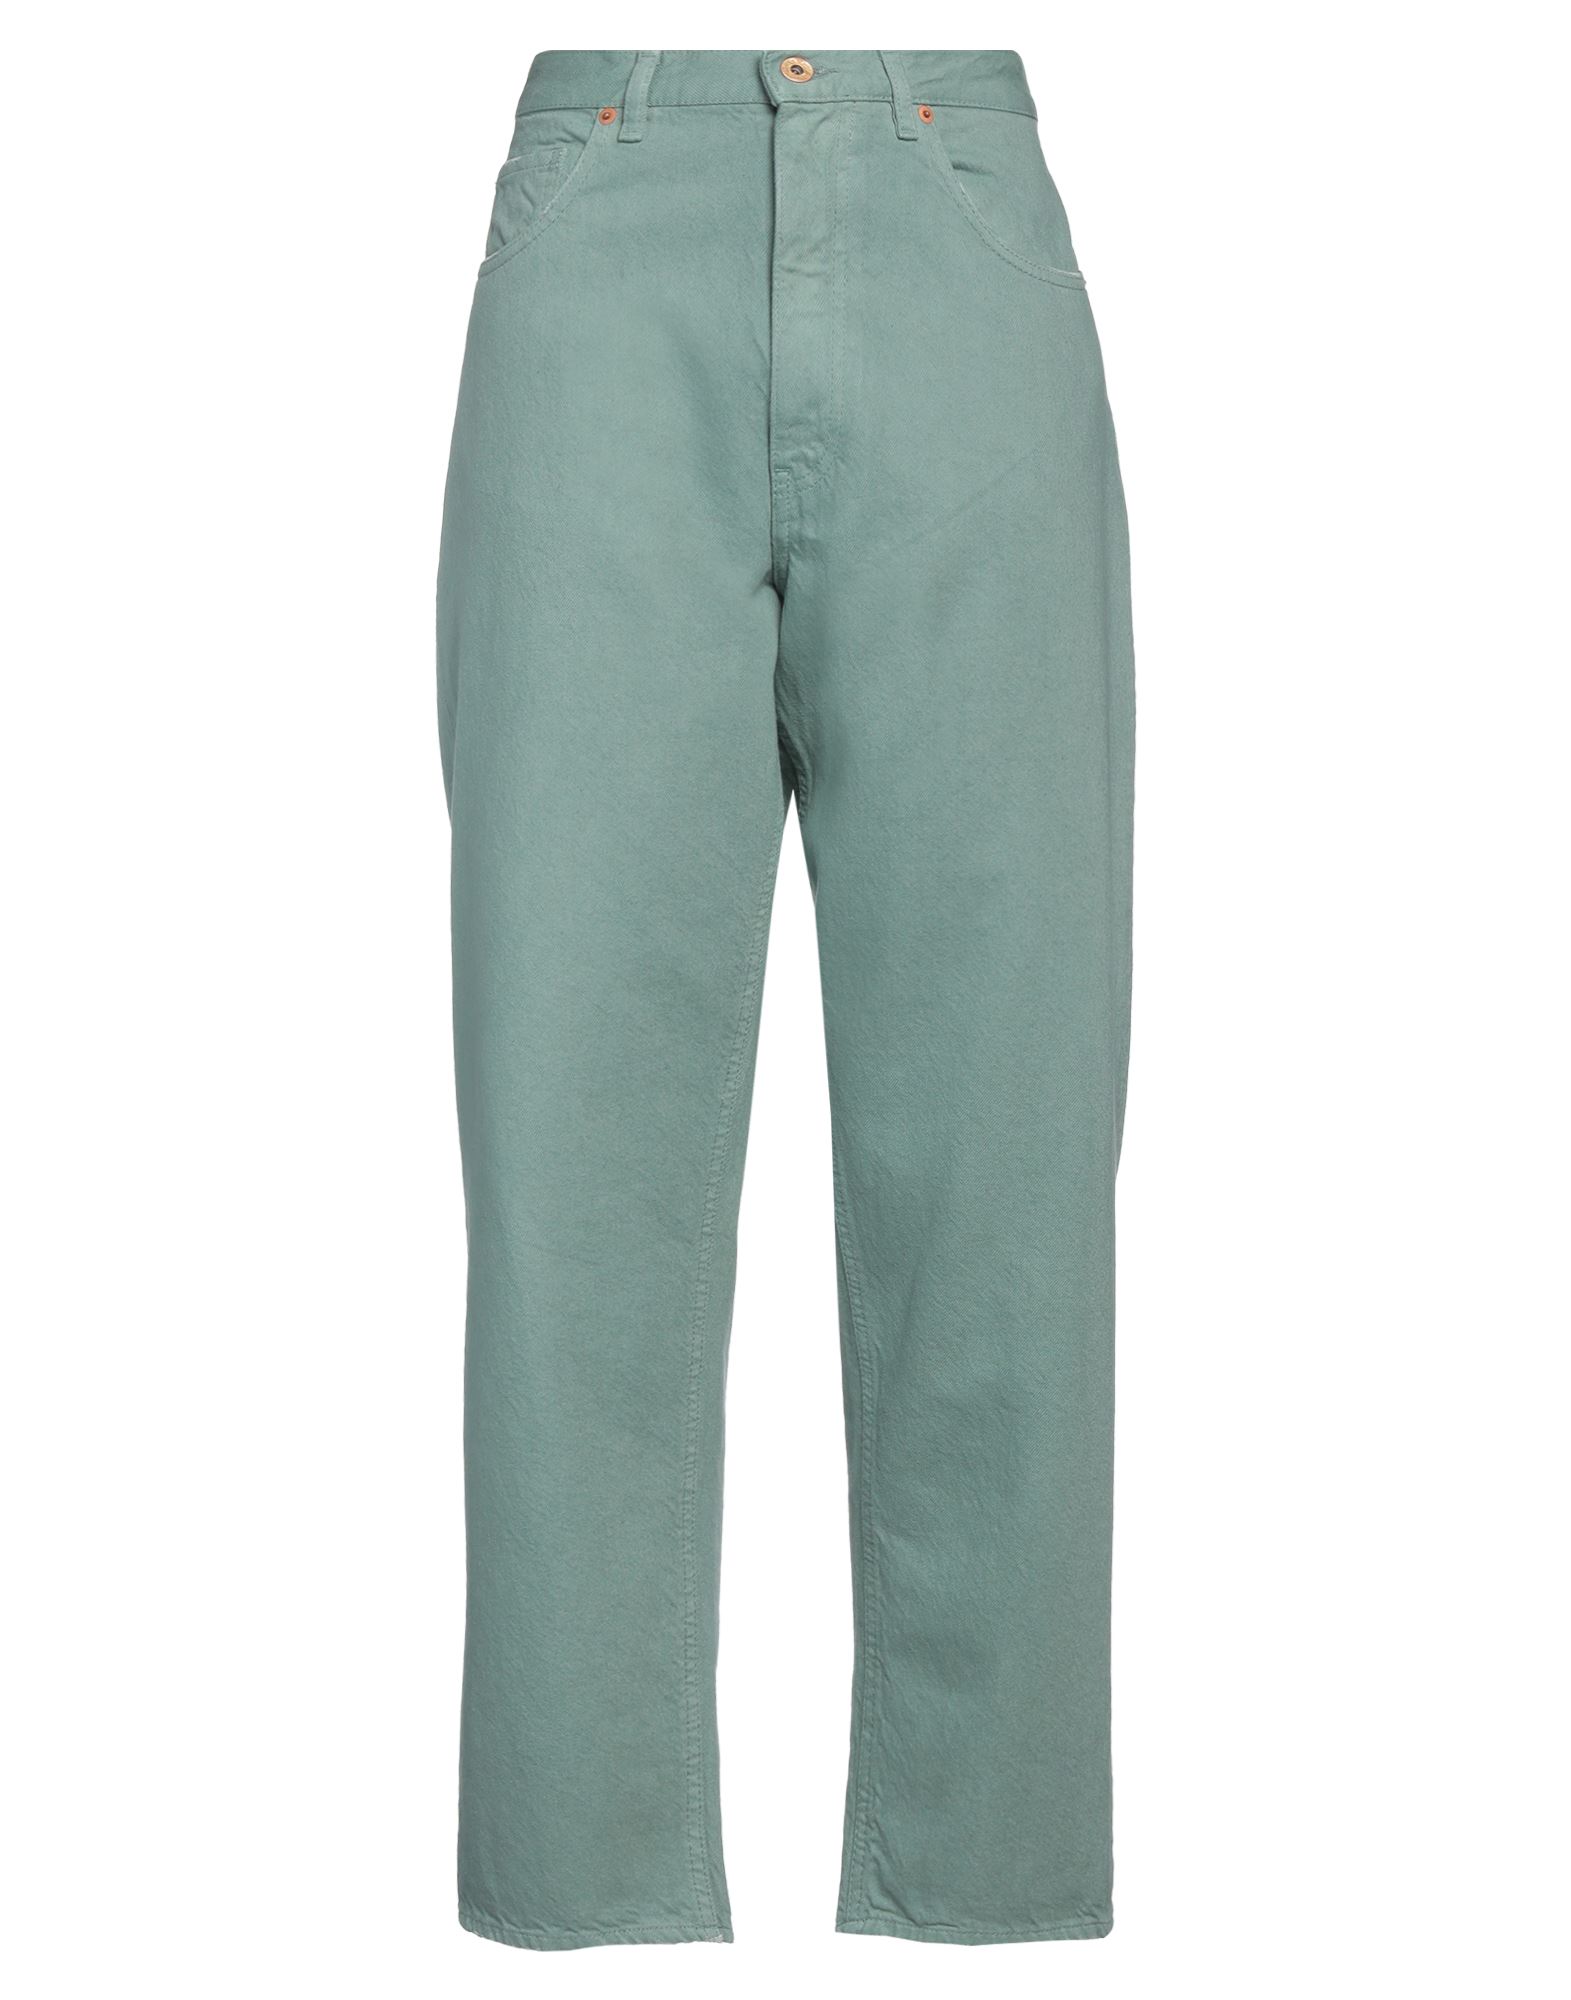 Pence Pants In Sage Green